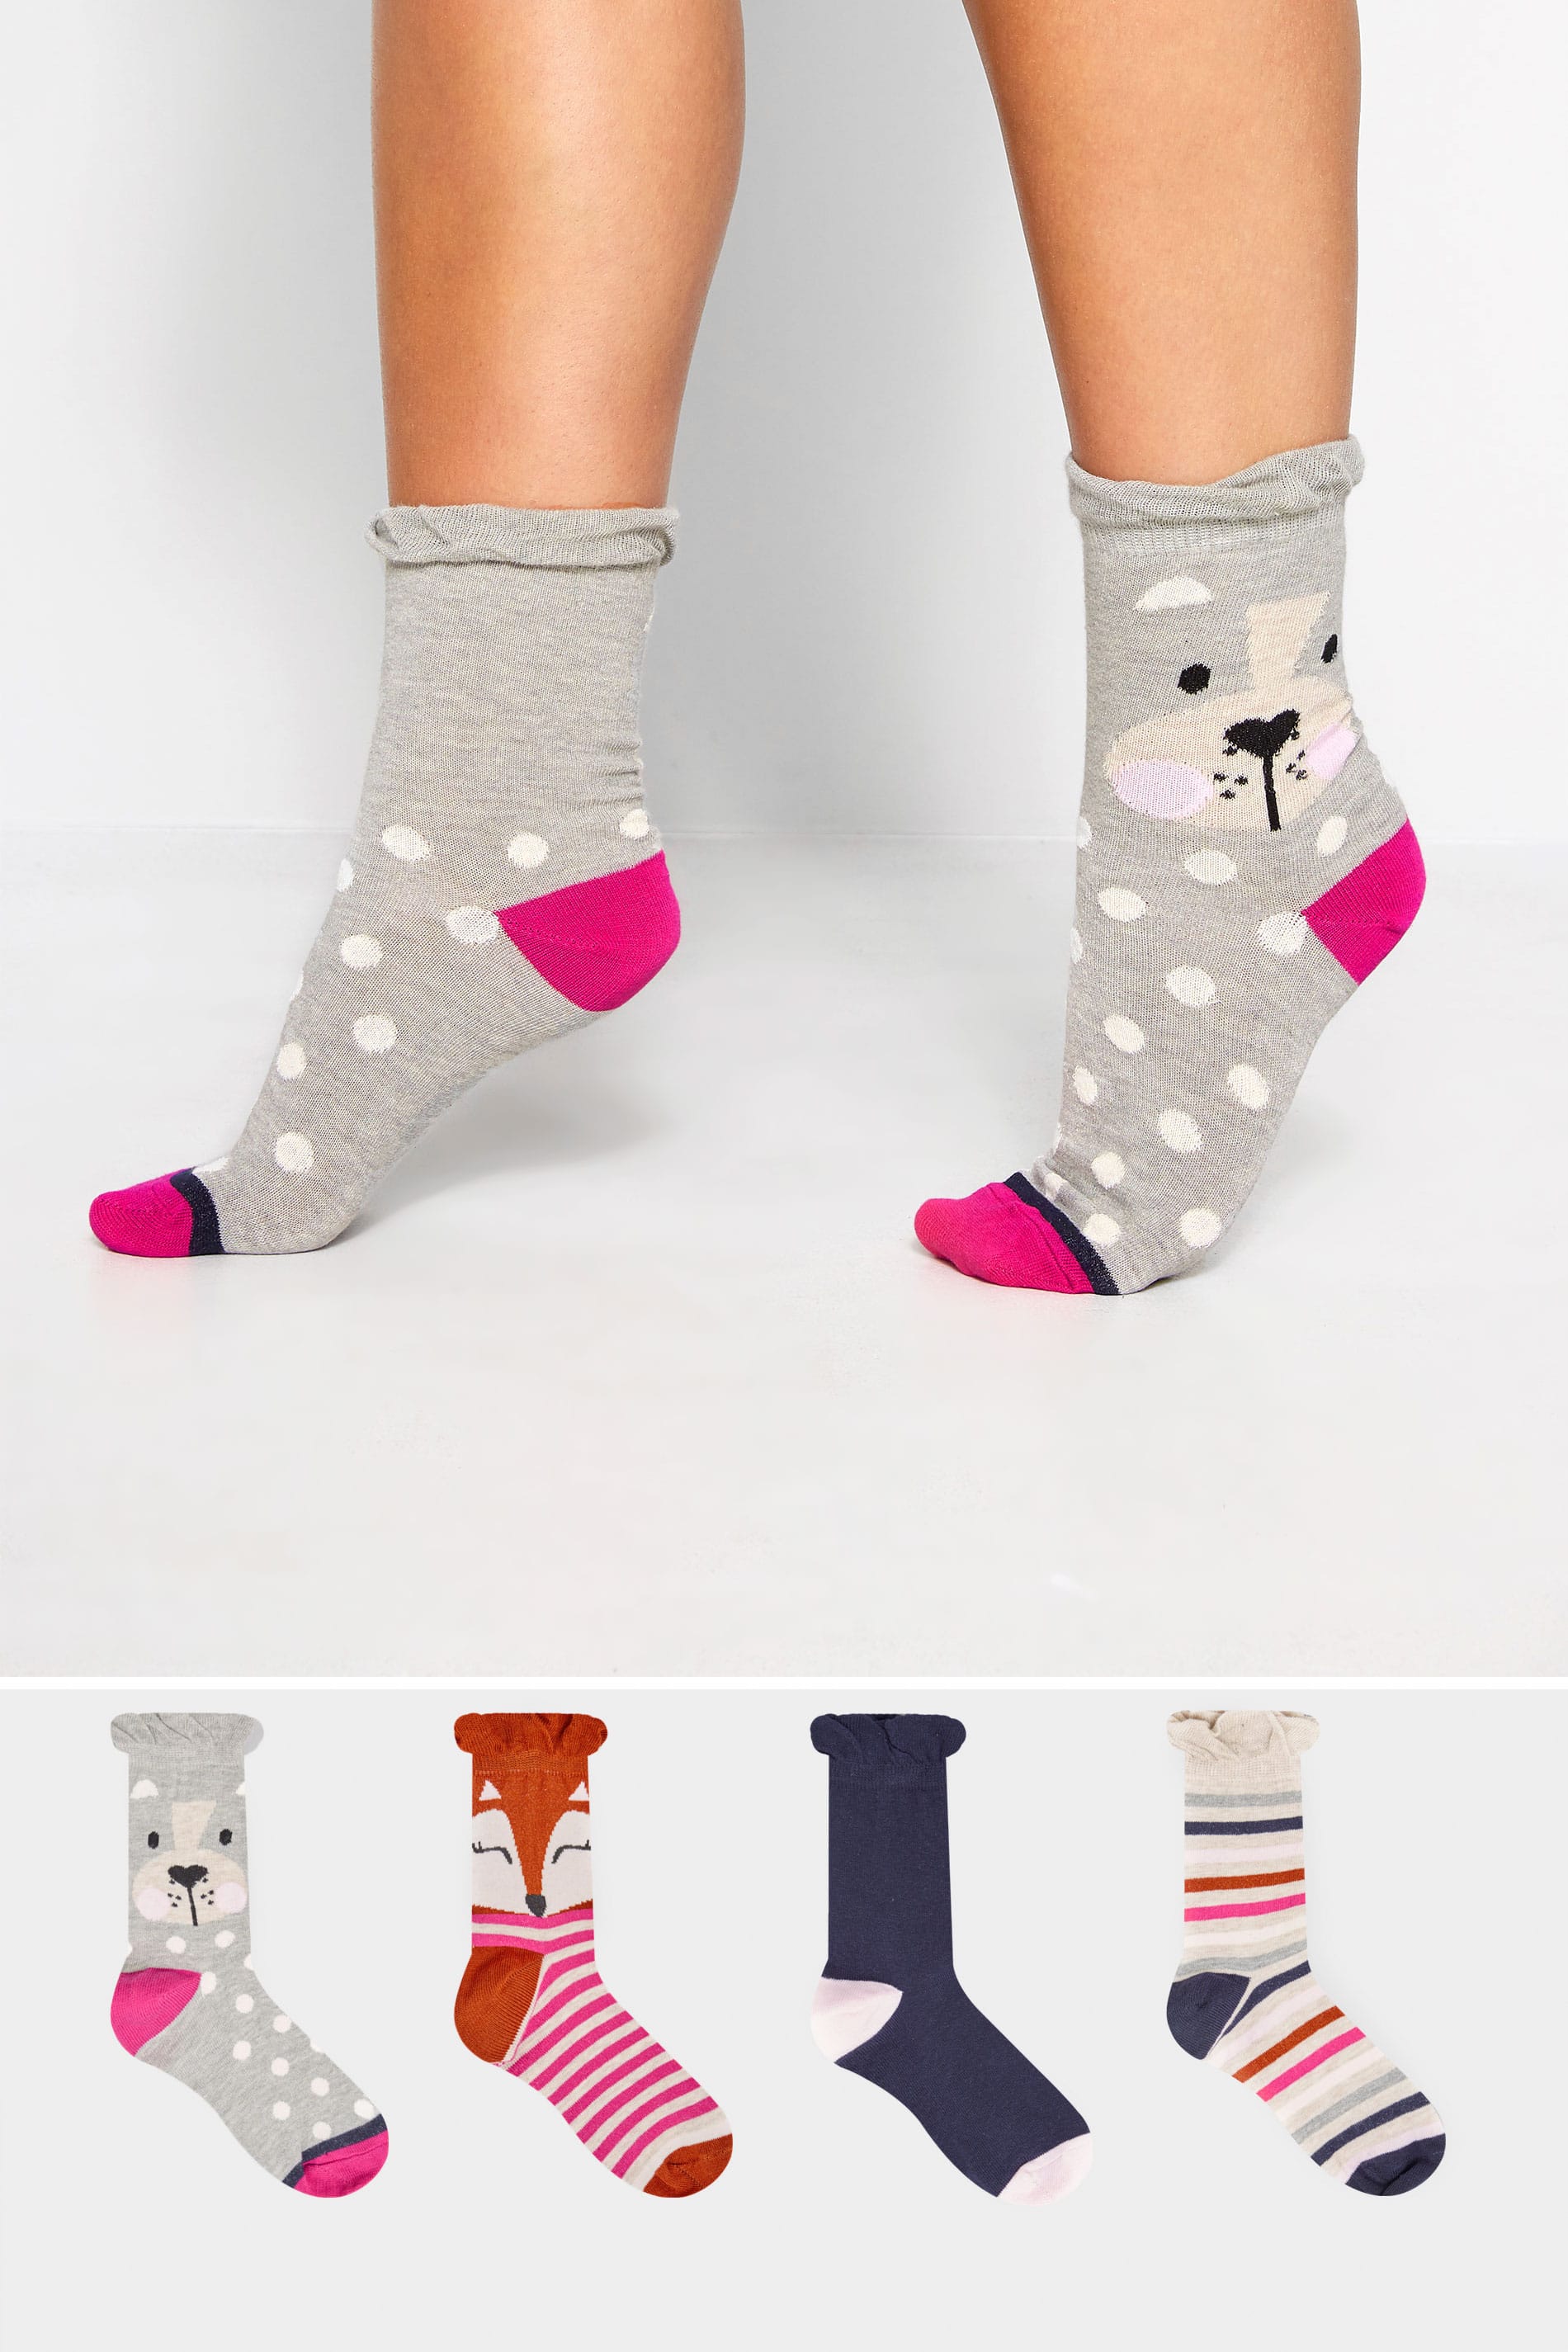 Yours Clothing 4 pack grey, navy & pink cute animal socks